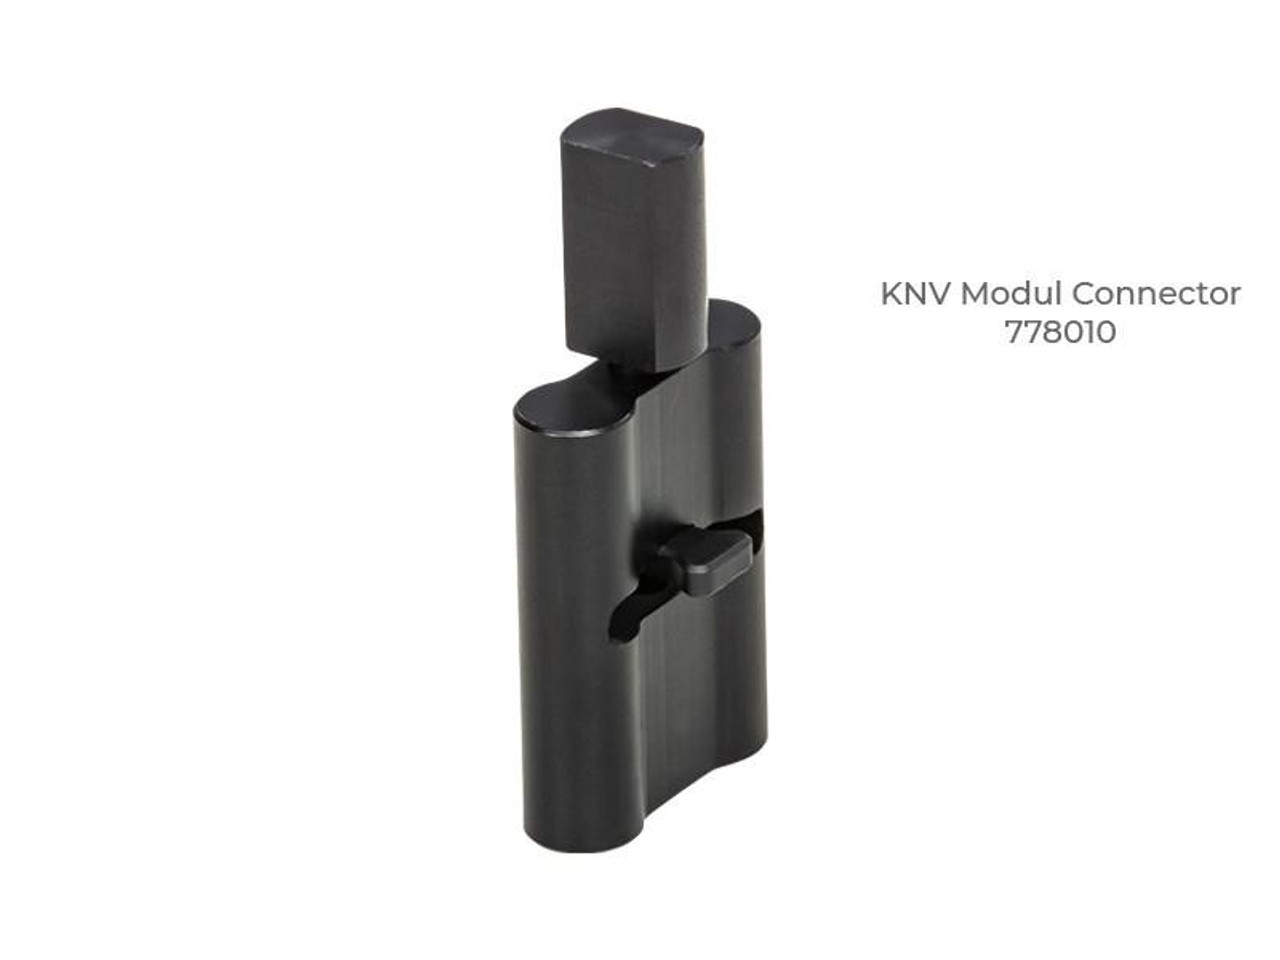 German Light Products 778010 KNV Module Connector (778010)